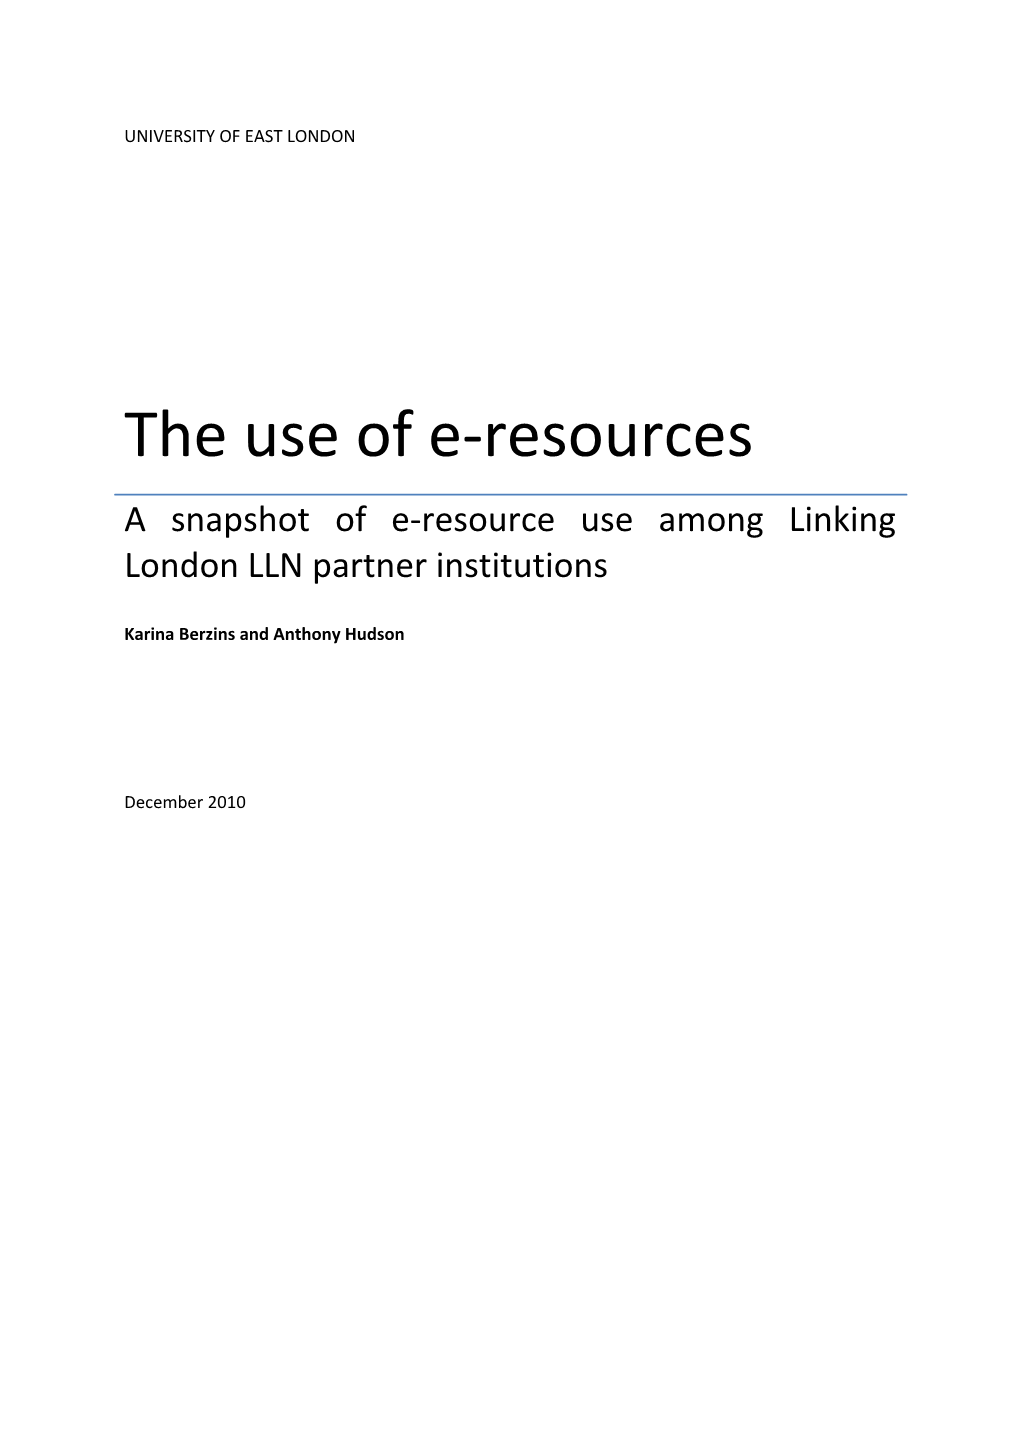 The Use of E-Resources